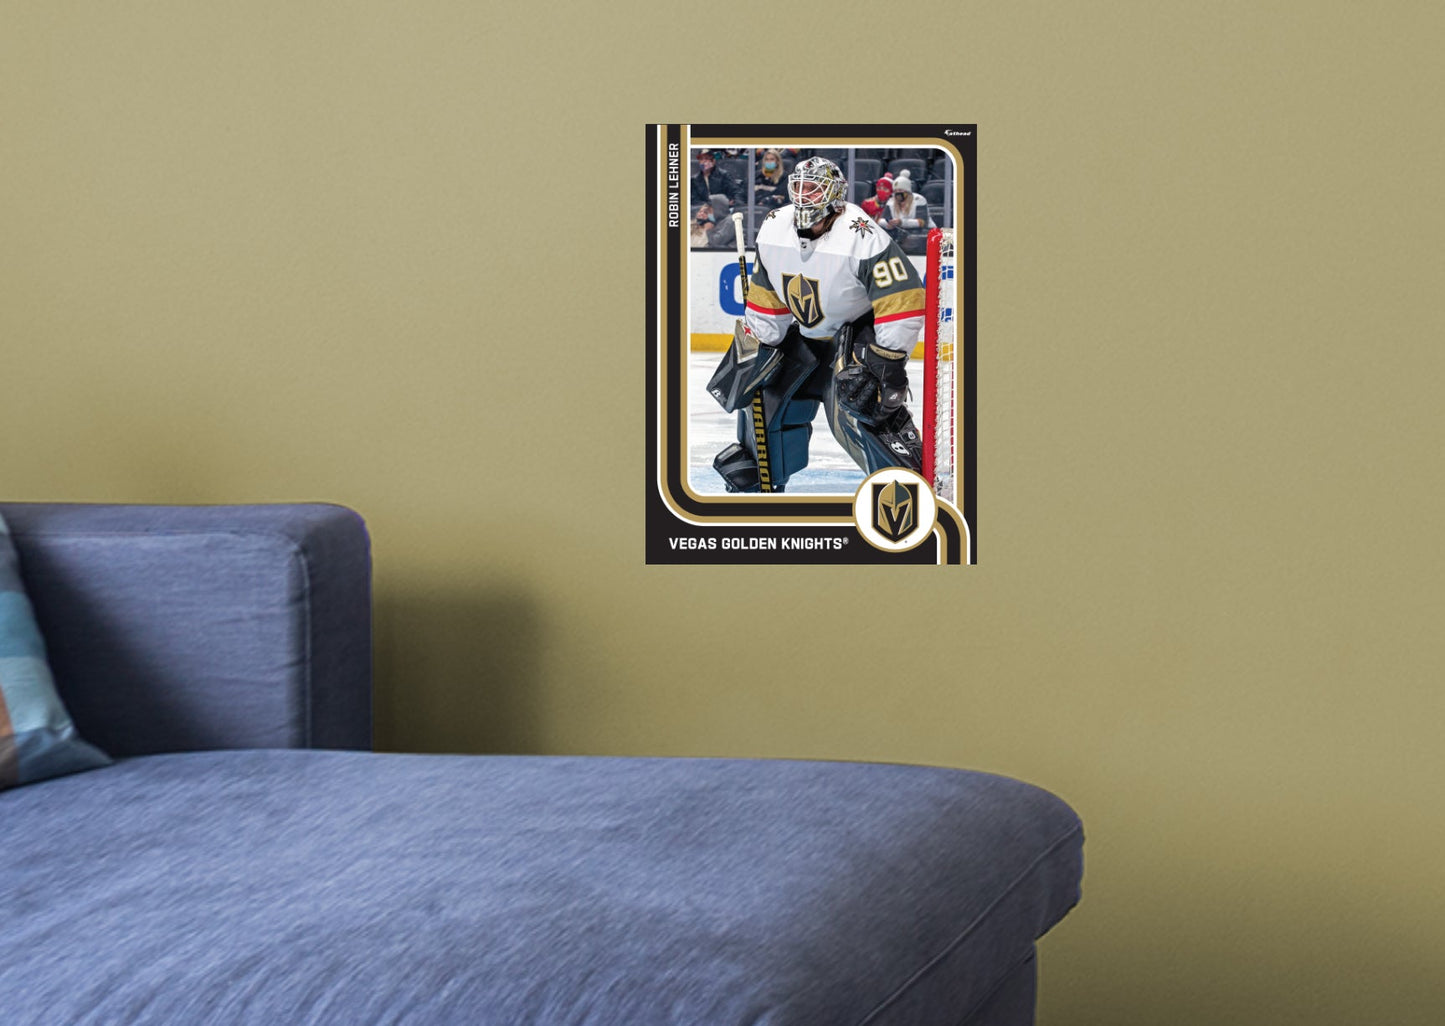 Vegas Golden Knights: Robin Lehner Poster - Officially Licensed NHL Removable Adhesive Decal